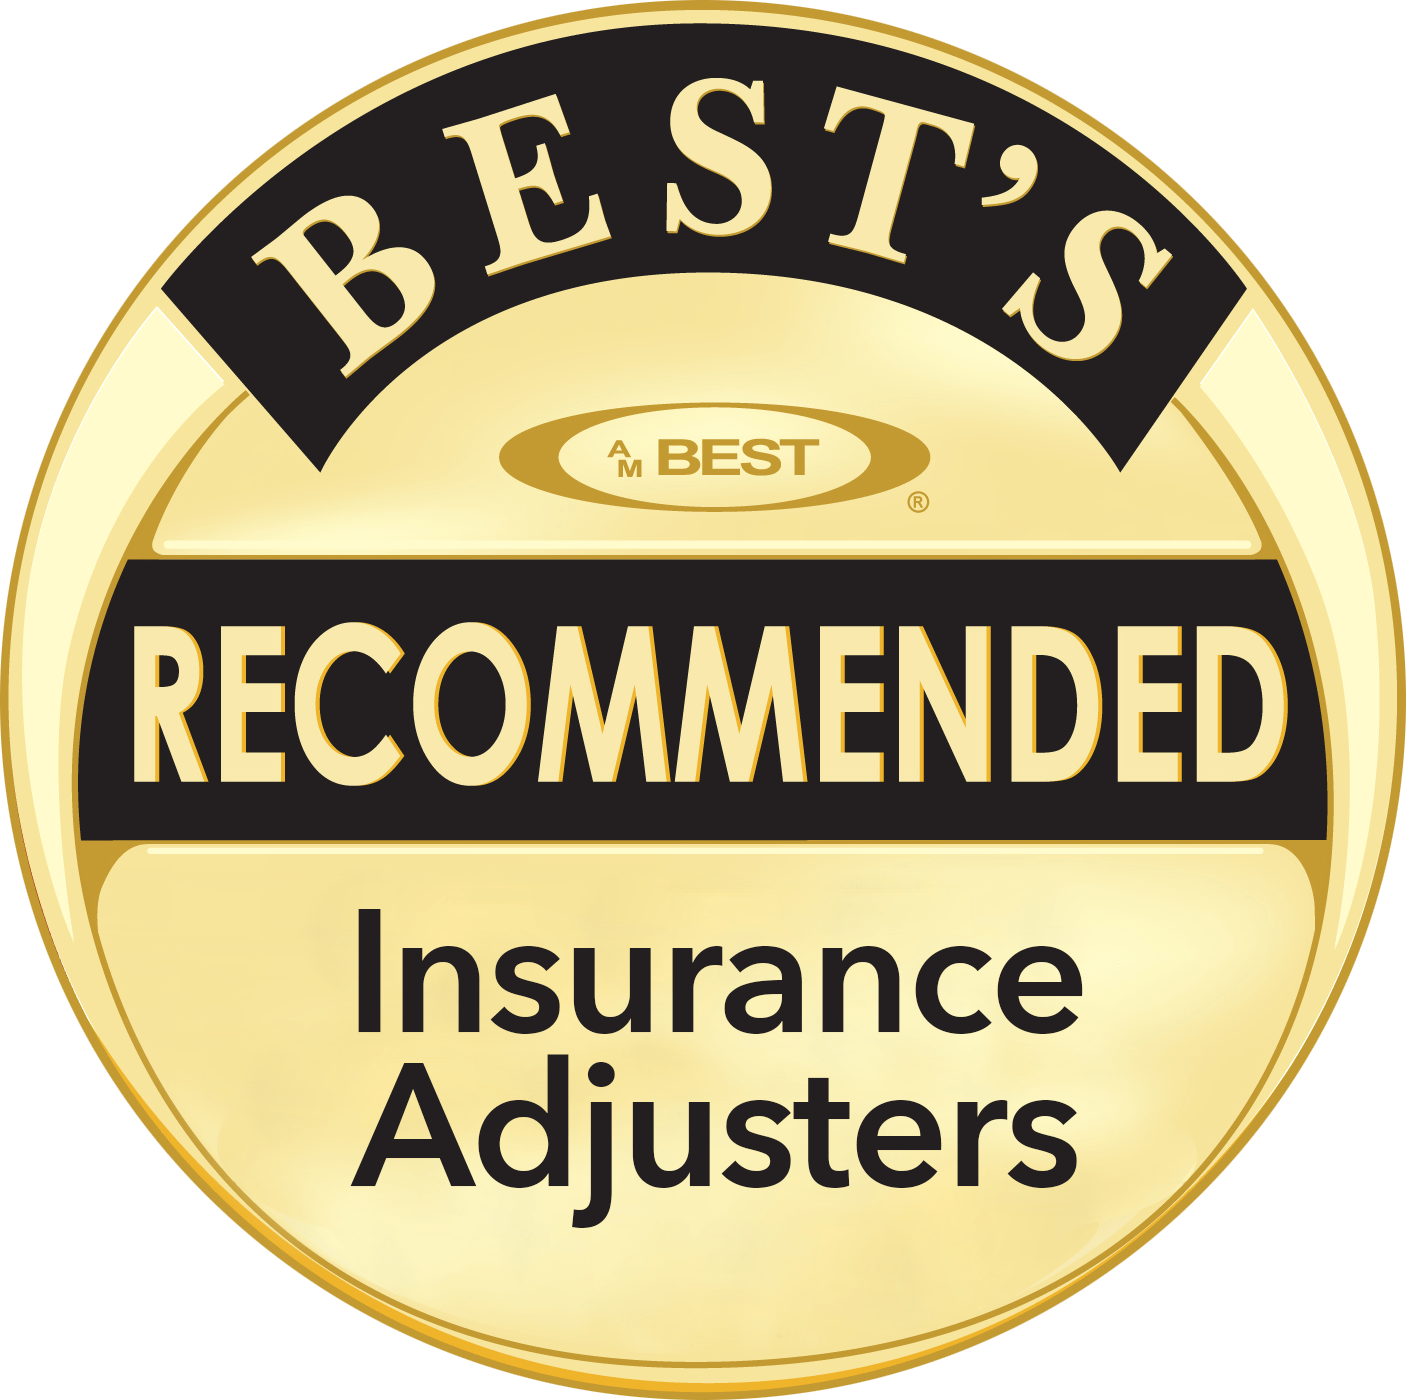 AM Best's Recommended Insurance Adjusters Award